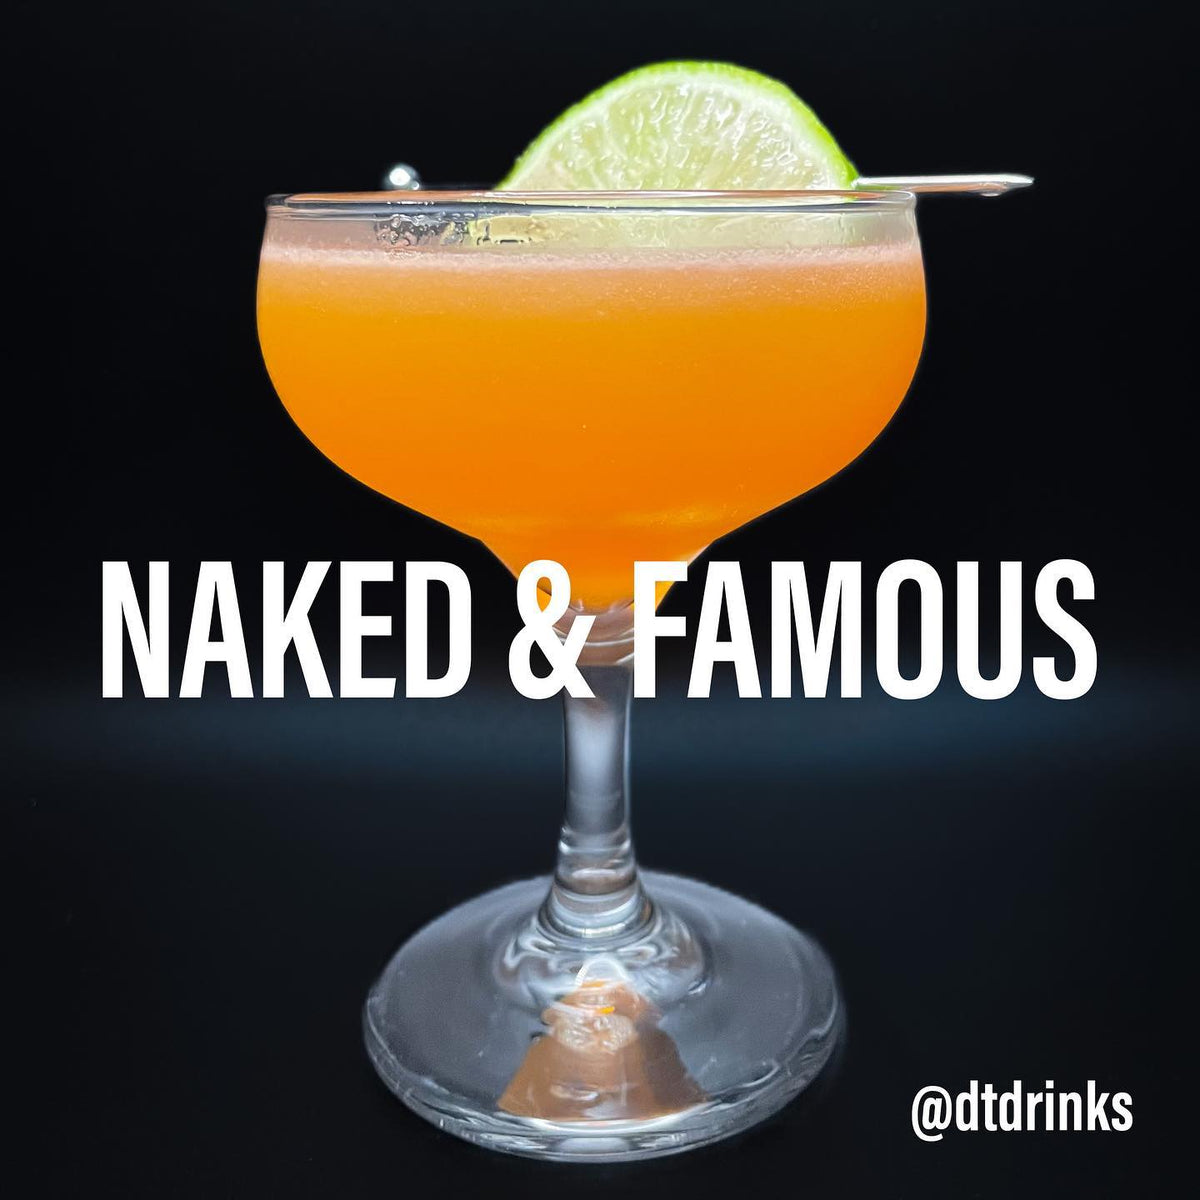 Naked & Famous Cocktail Recipe